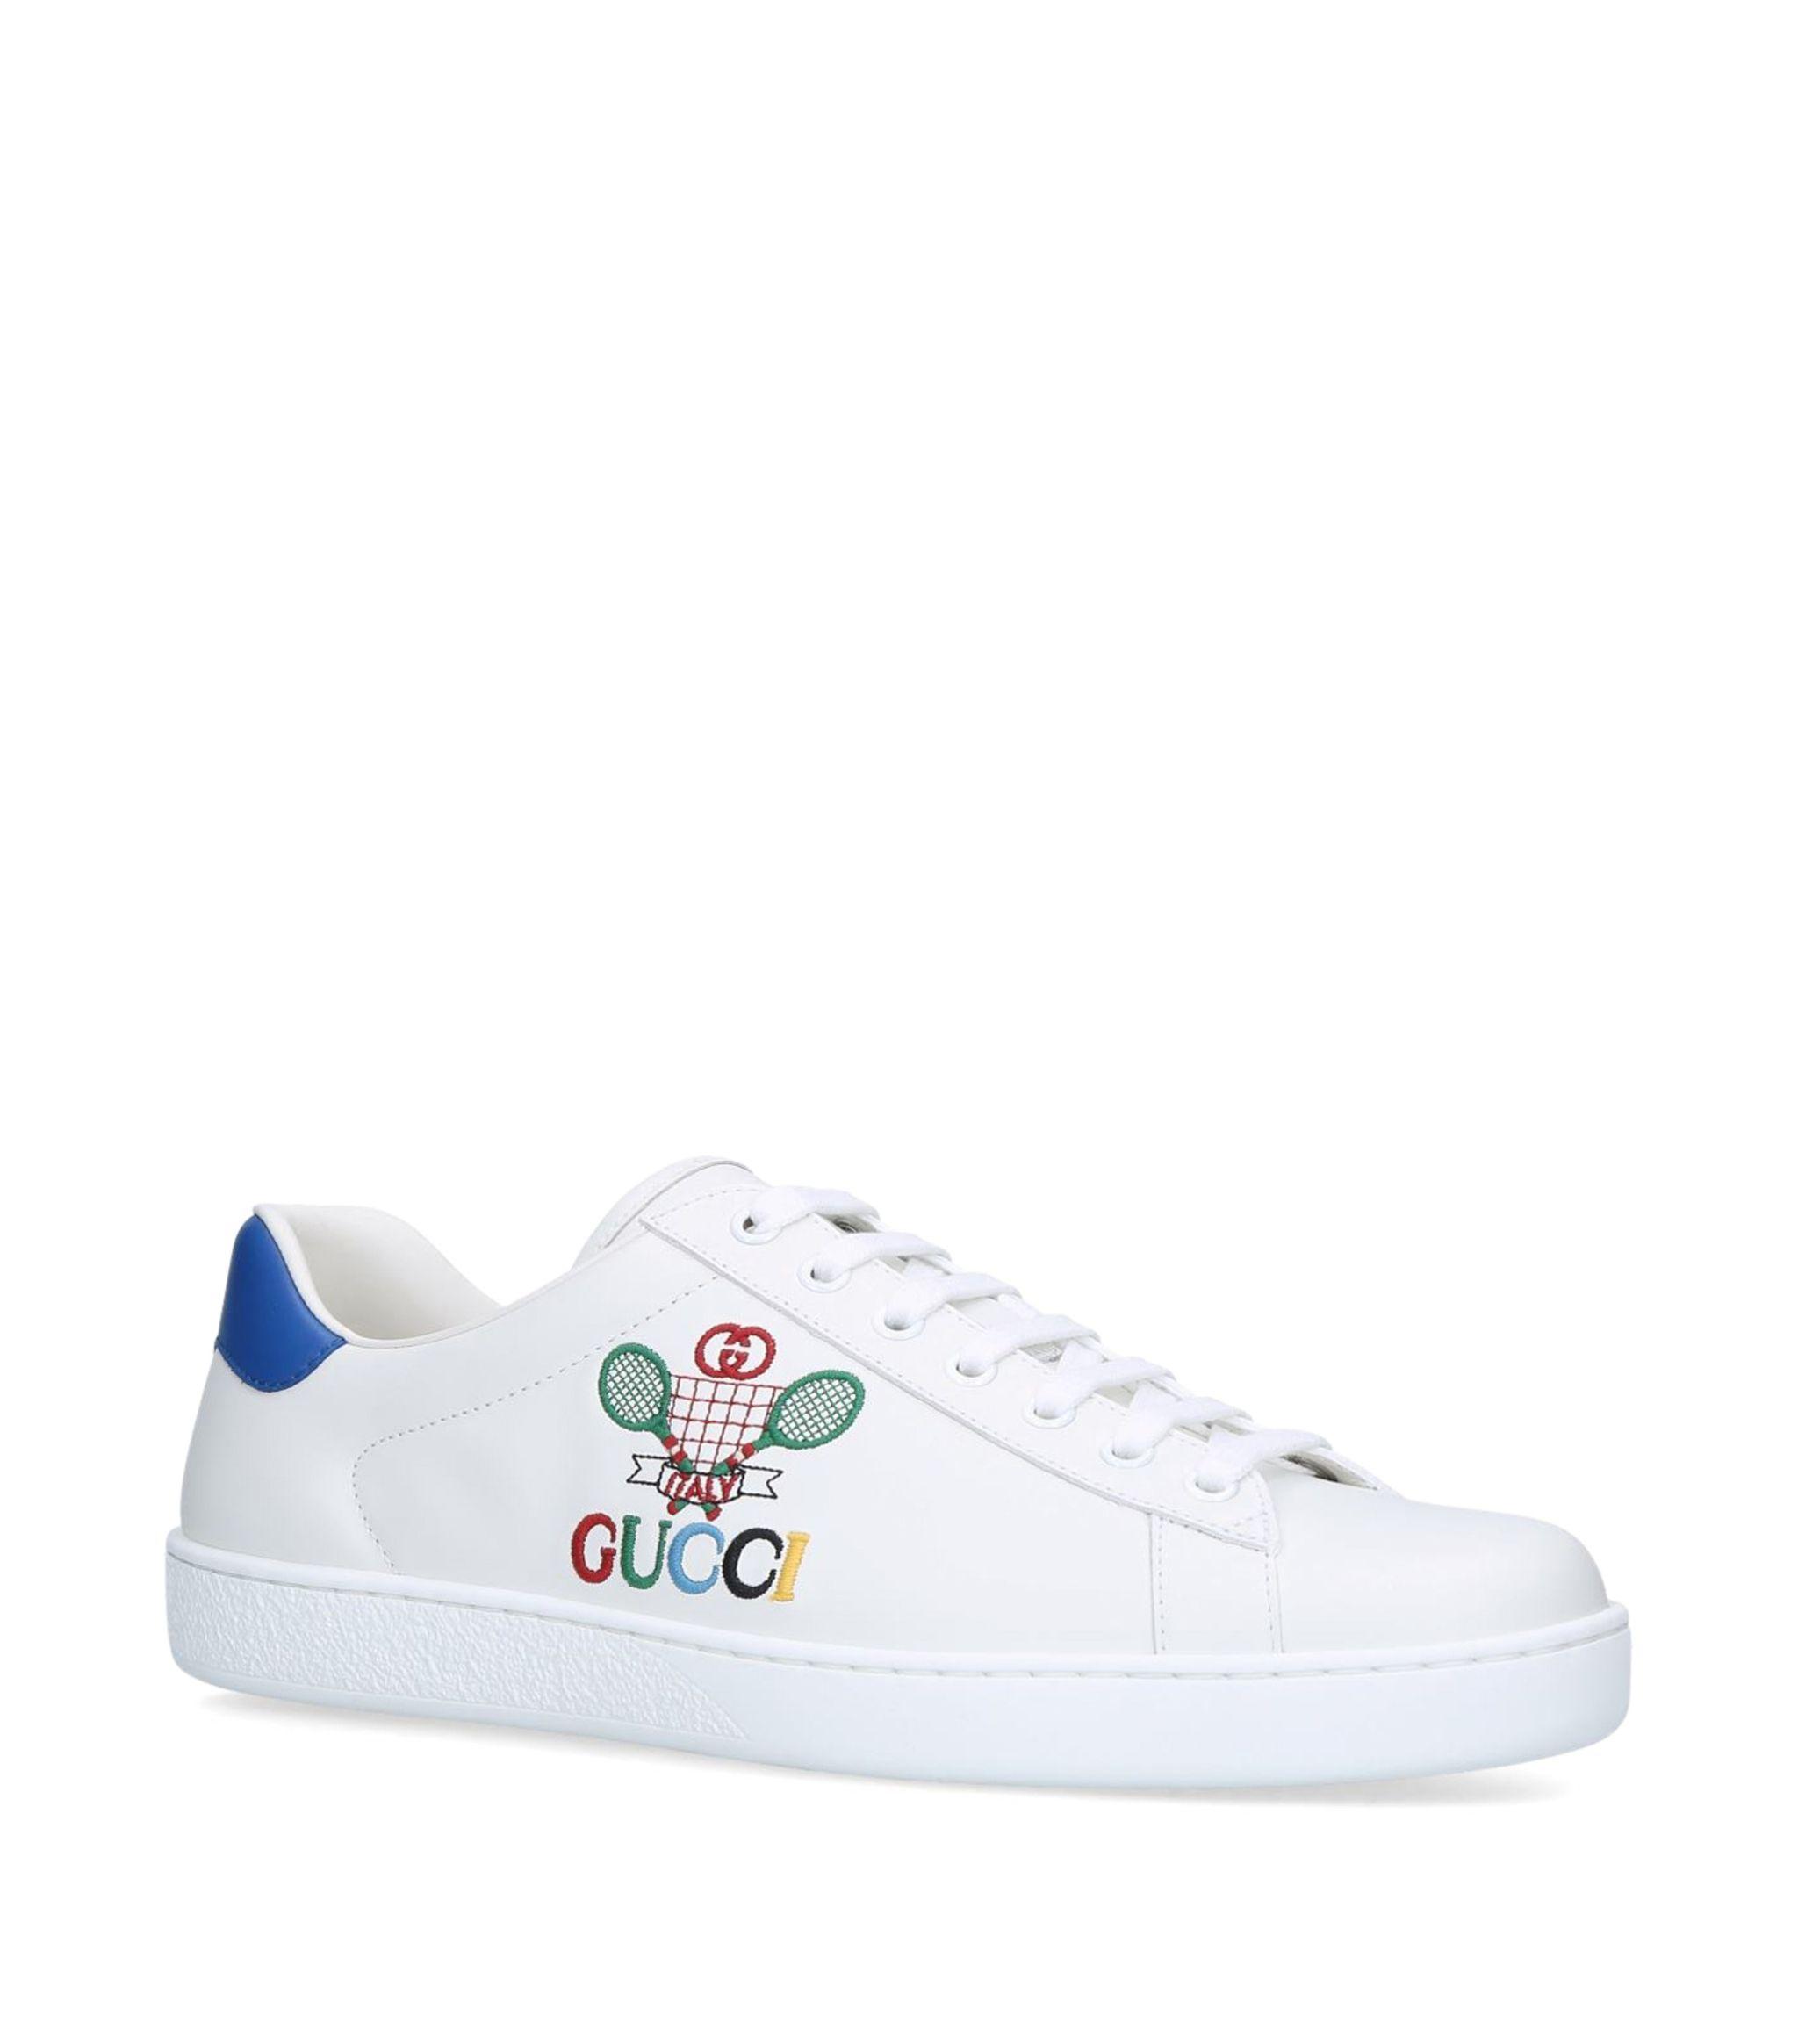 Gucci Leather Ace Logo Tennis Sneakers in White for Men - Save 6% - Lyst